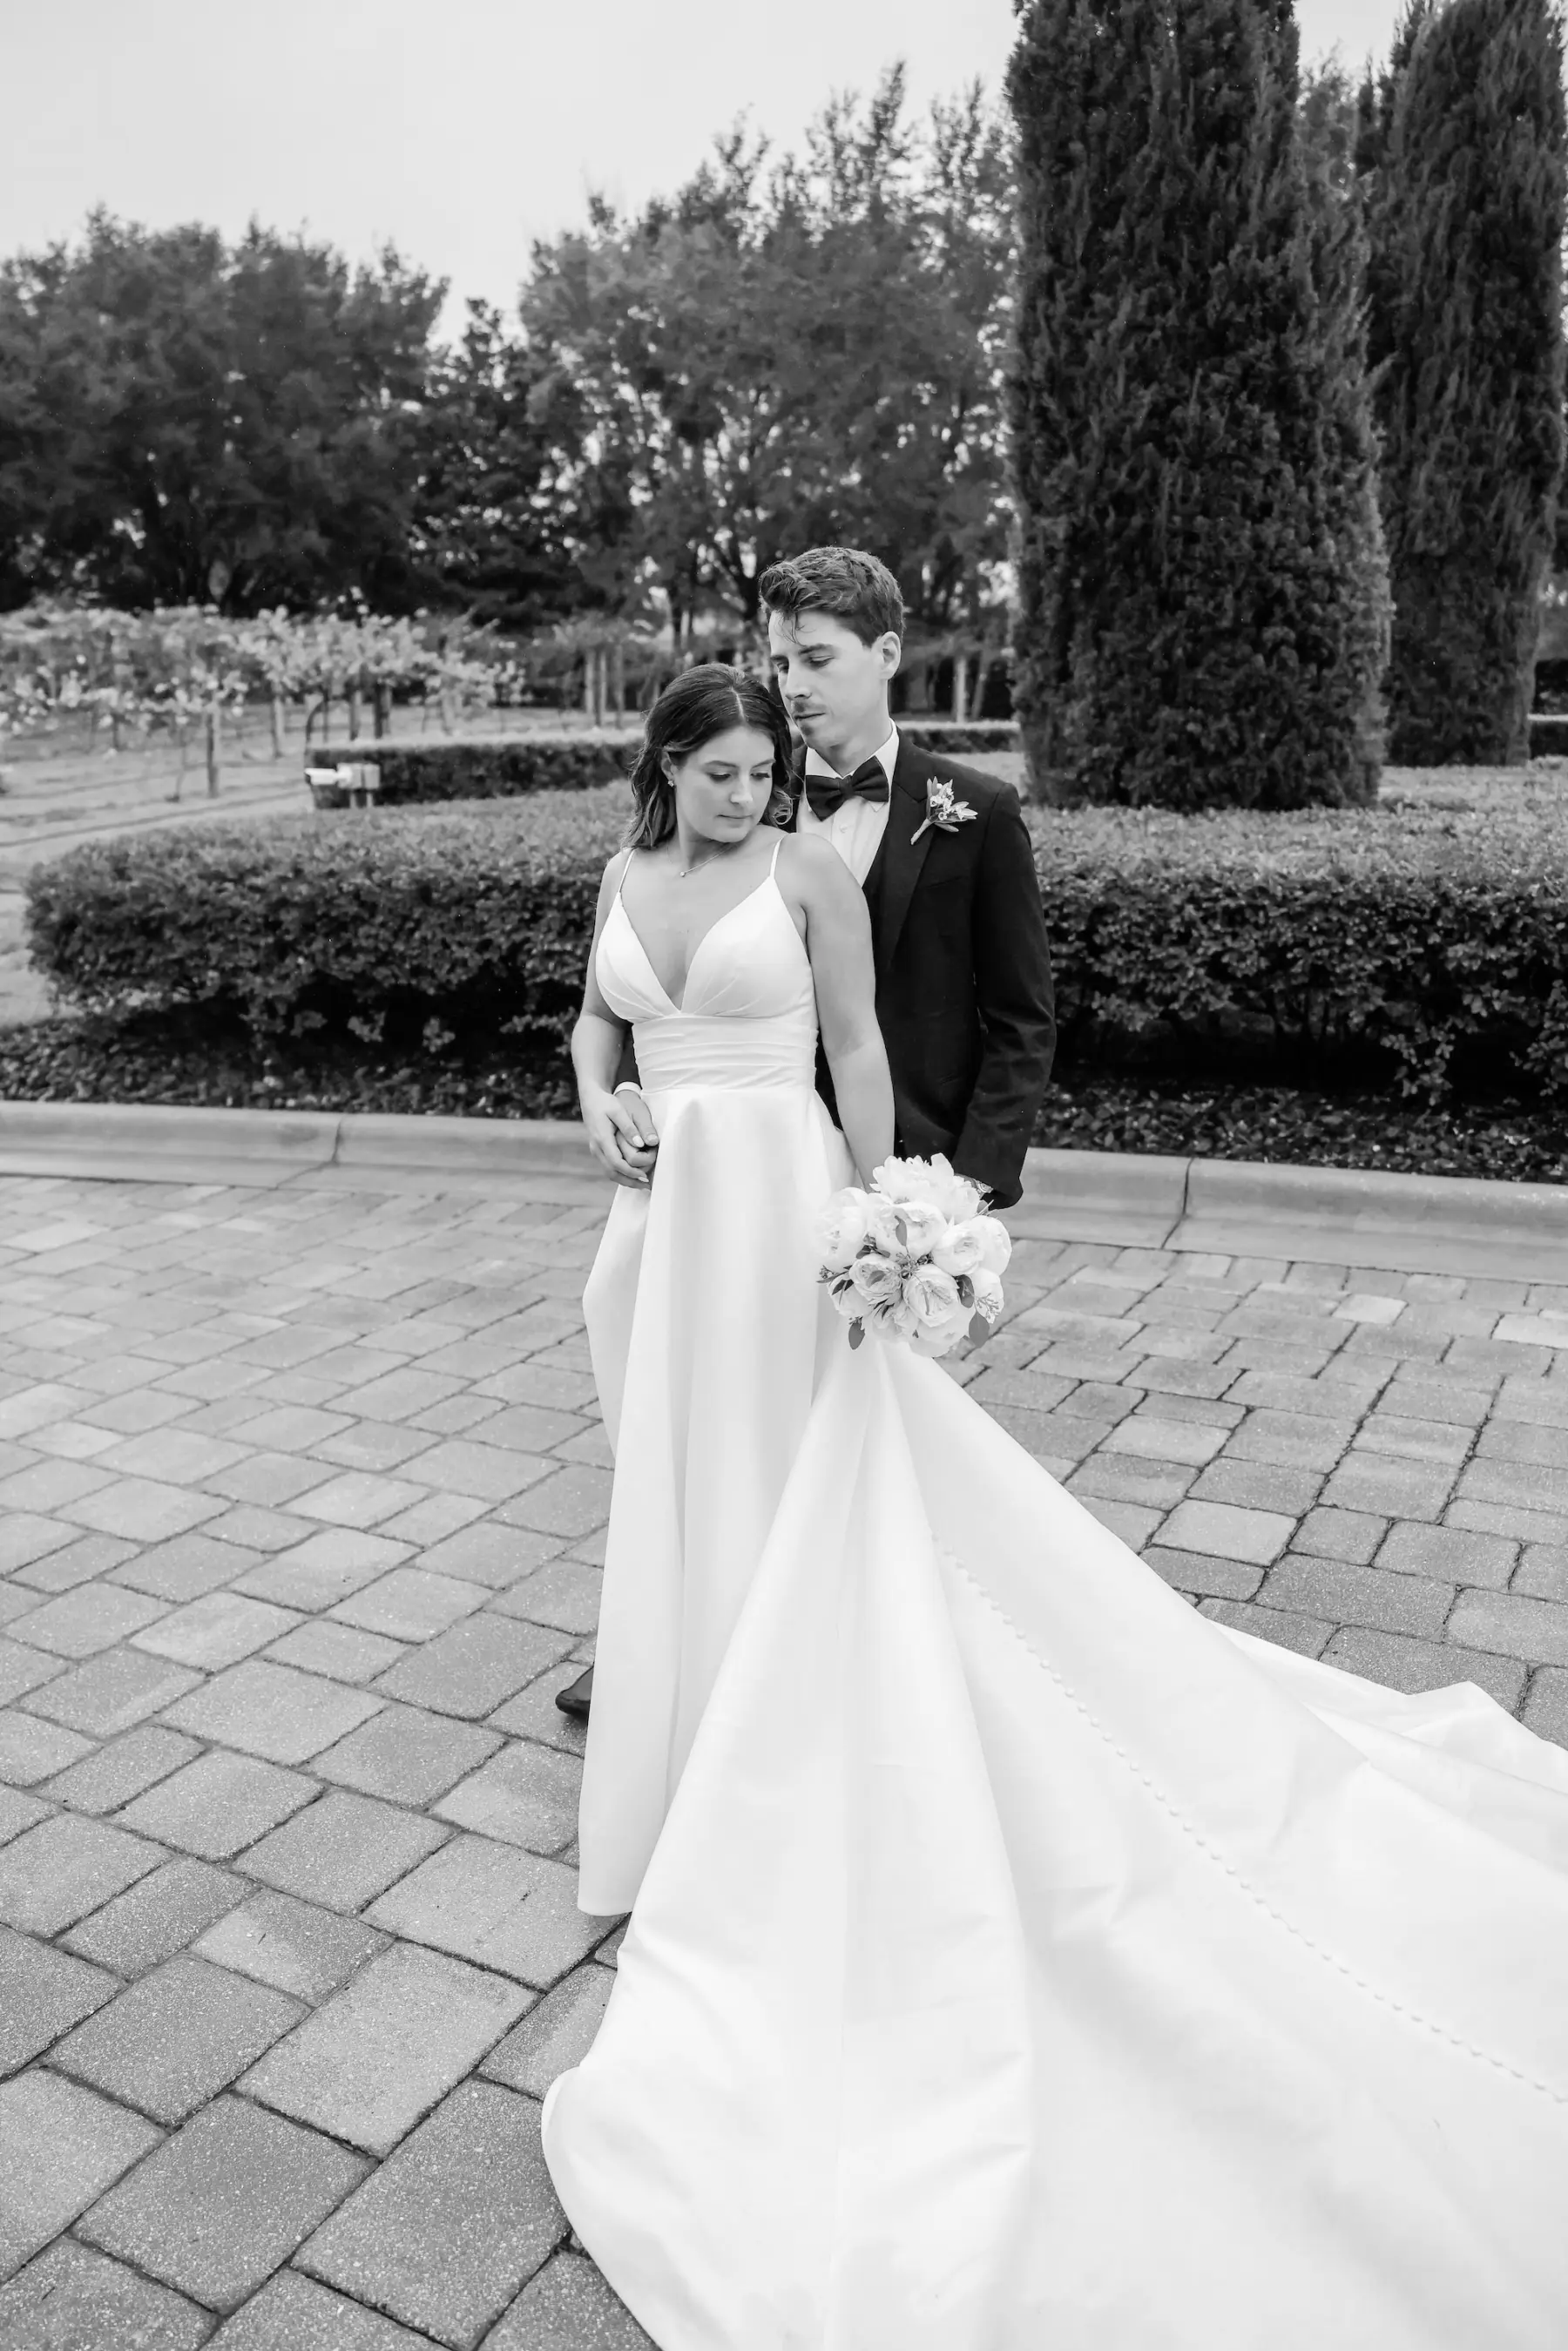 Bride and Groom Black and White Vineyard Wedding Portrait | Tampa Bay Event Venue Mision Lago Estate | Photographer Lifelong Photography Studio | Planner Blue Skies Weddings and Events